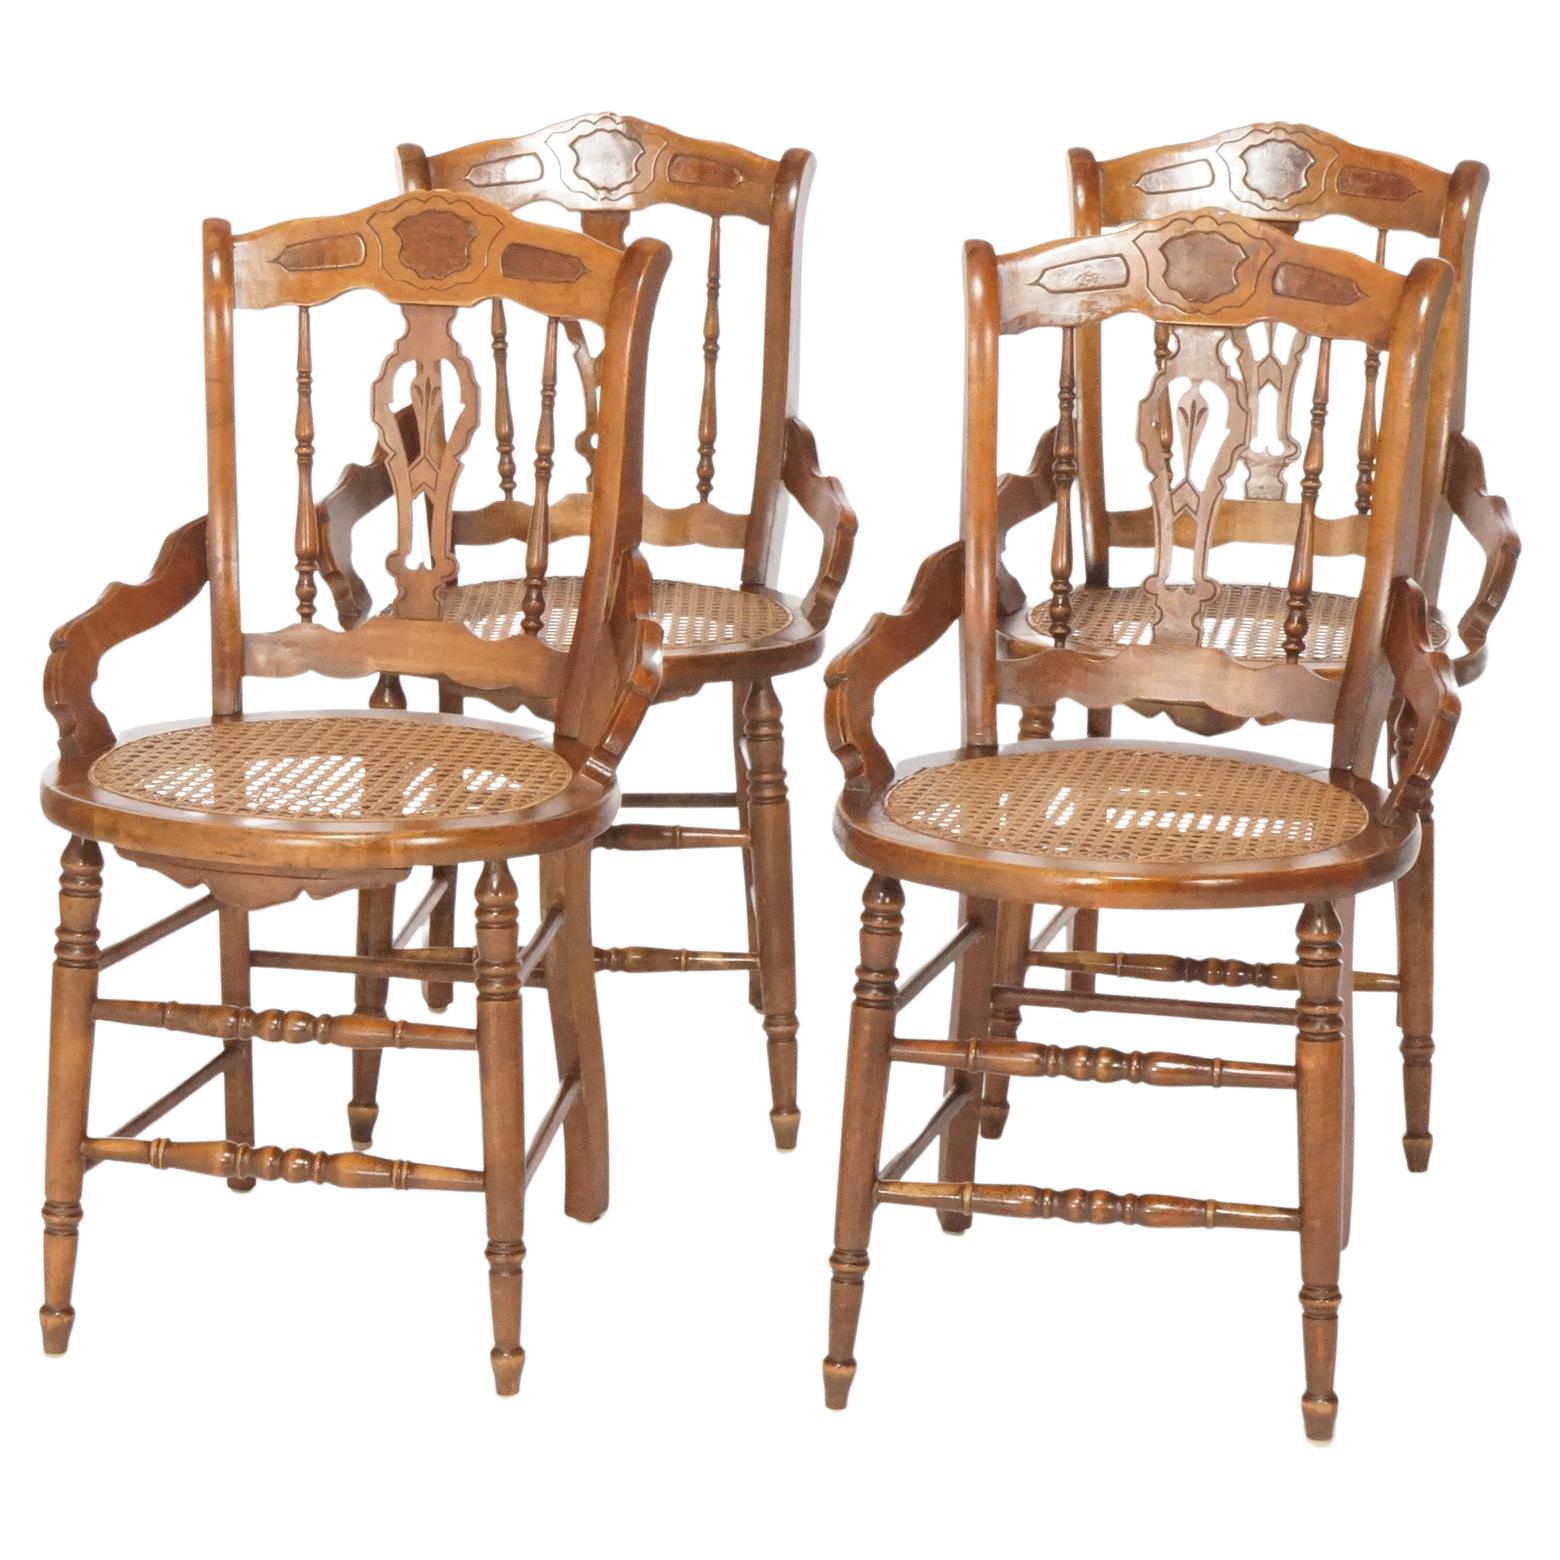 Antique Set of Four Victorian Walnut, Burl & Cane Seat Dining Chairs, Circa 1890